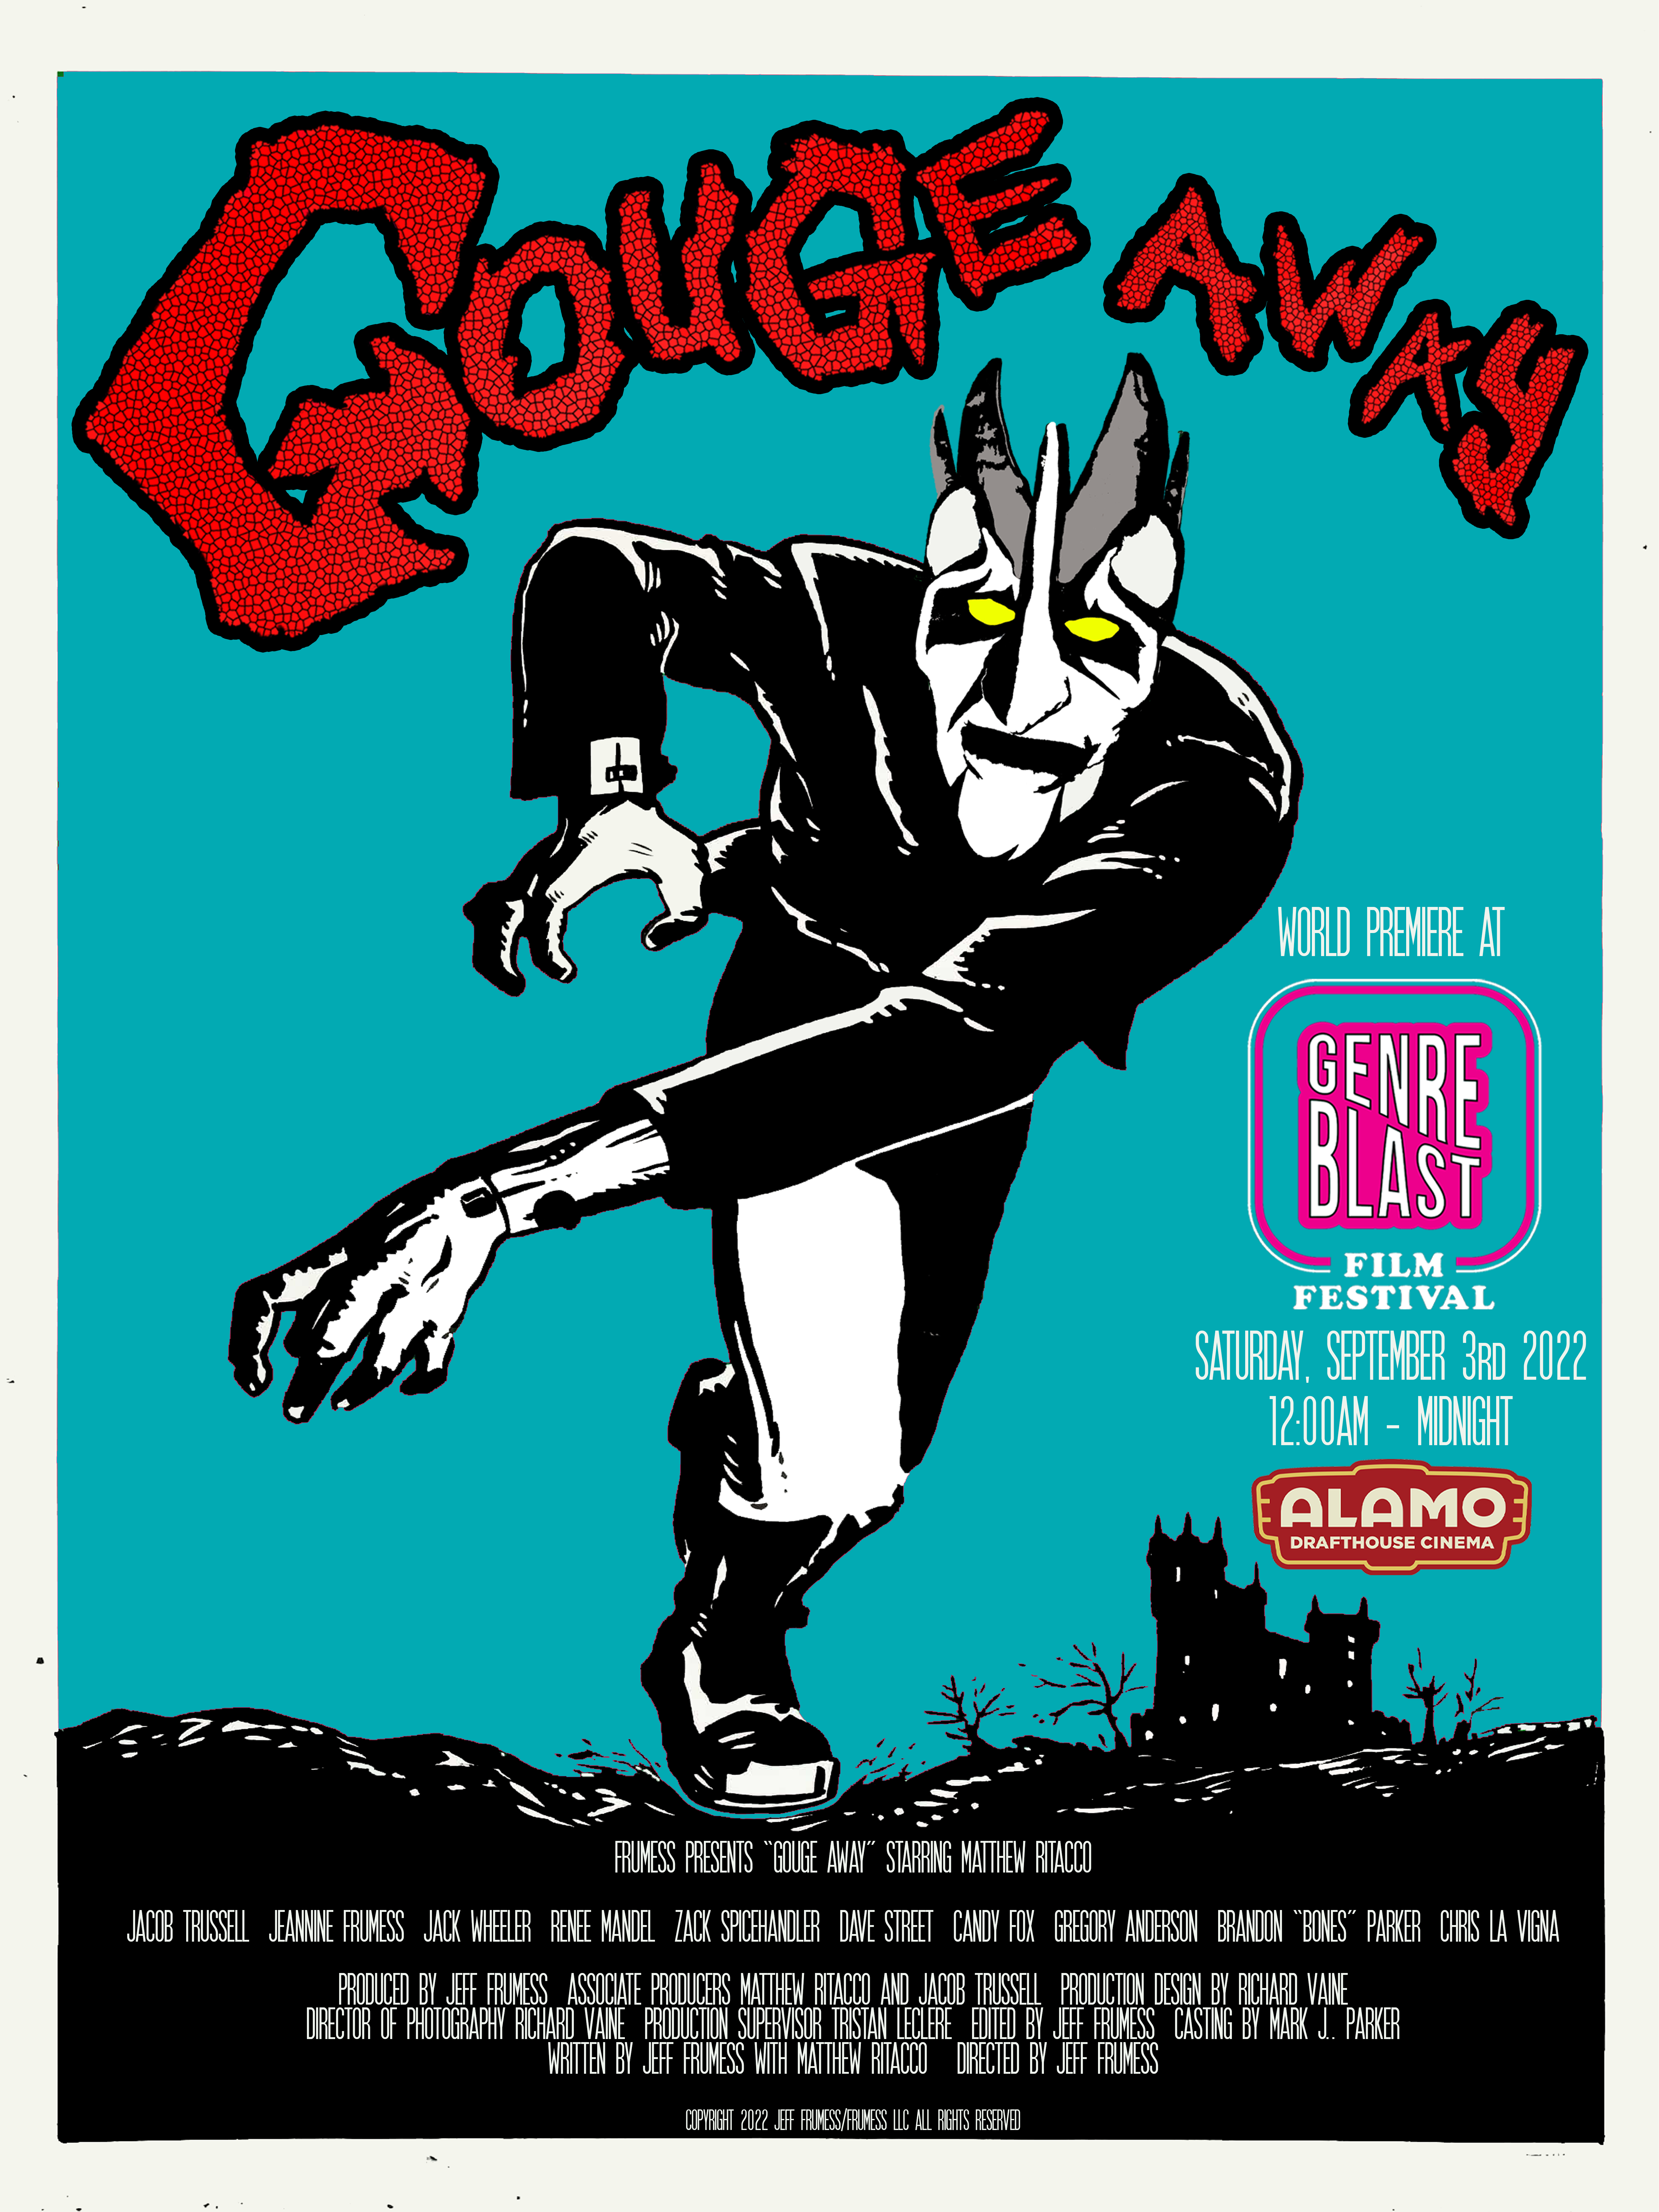 Gouge Away - 'Gouge Away': A Lost Film Come To Life [Giallo Julian's Indie Spotlight]